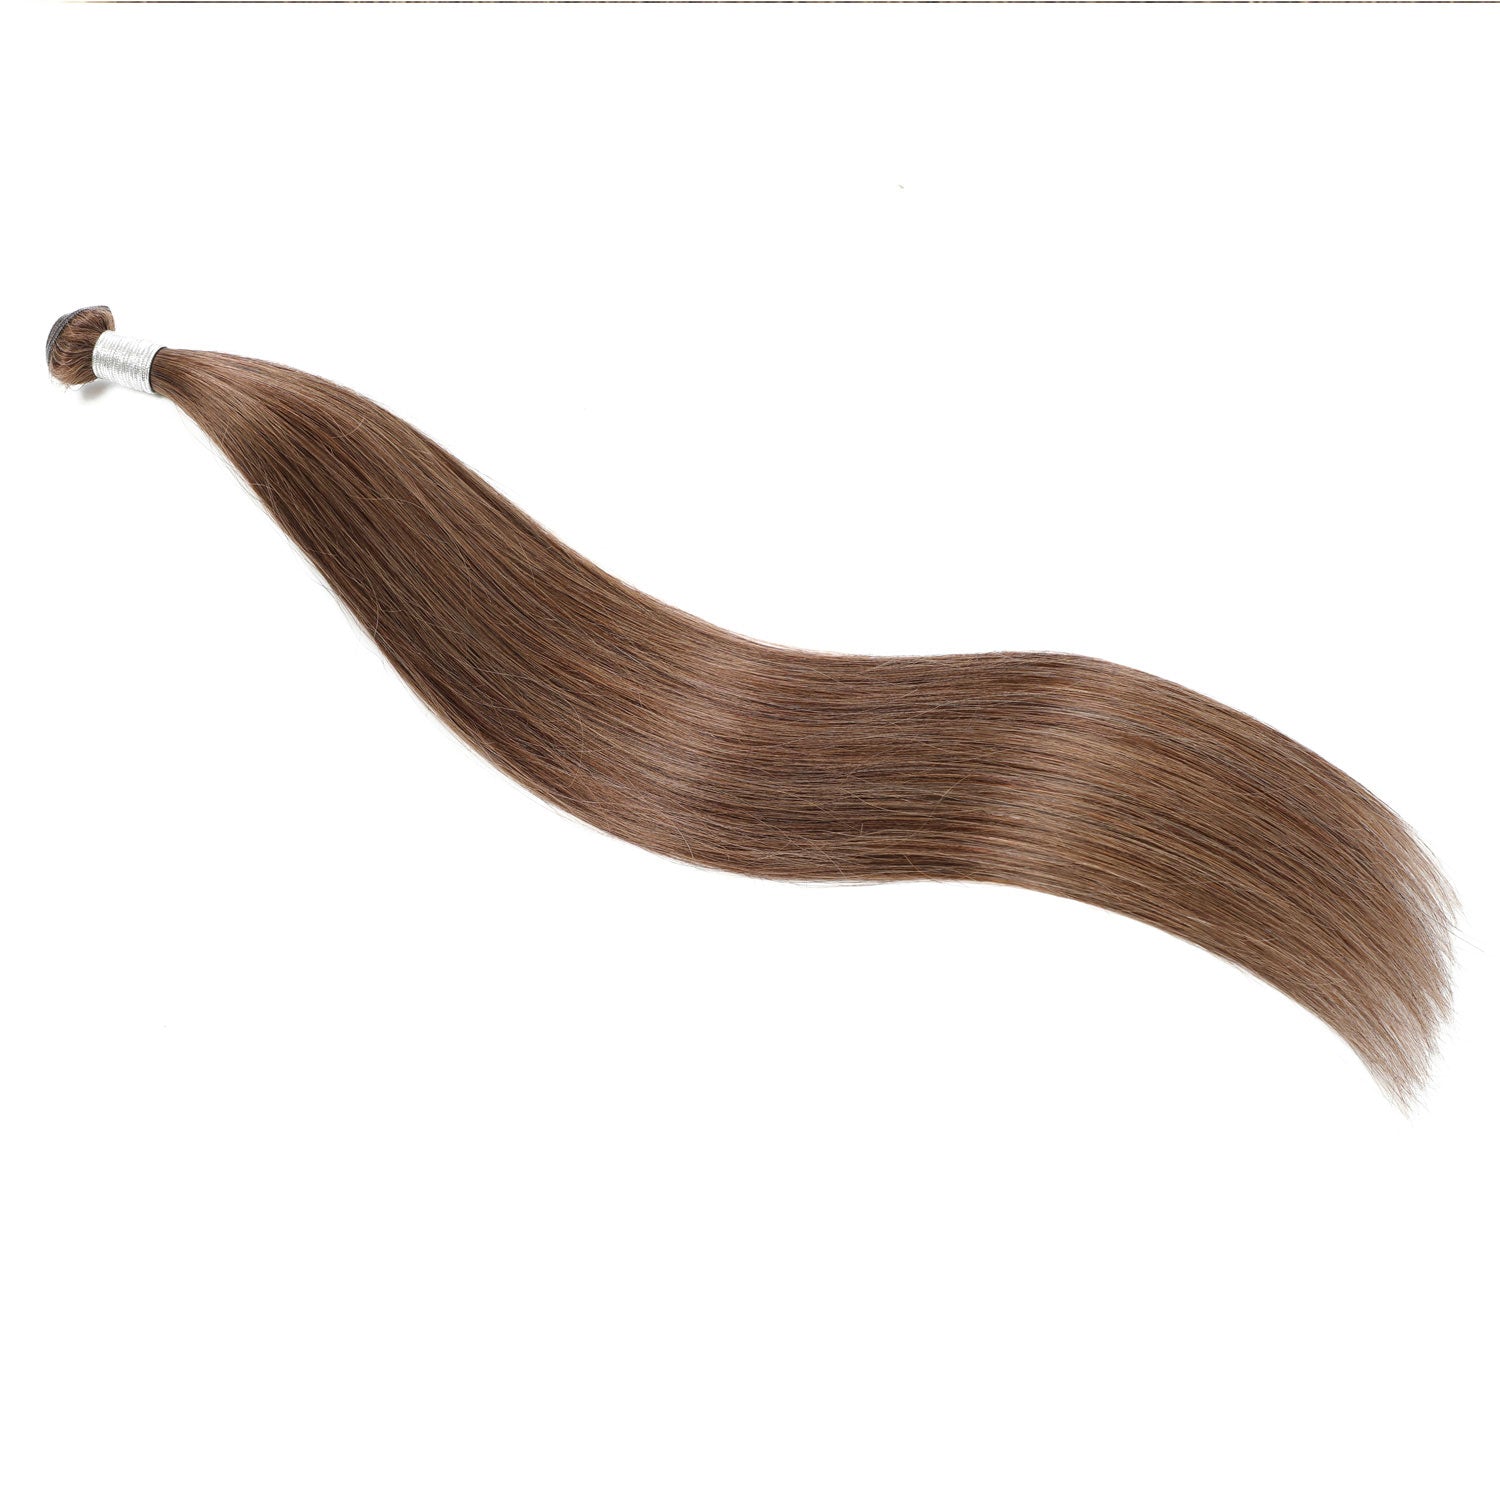 100% Remy Human Hair Extensions for Length and Volume